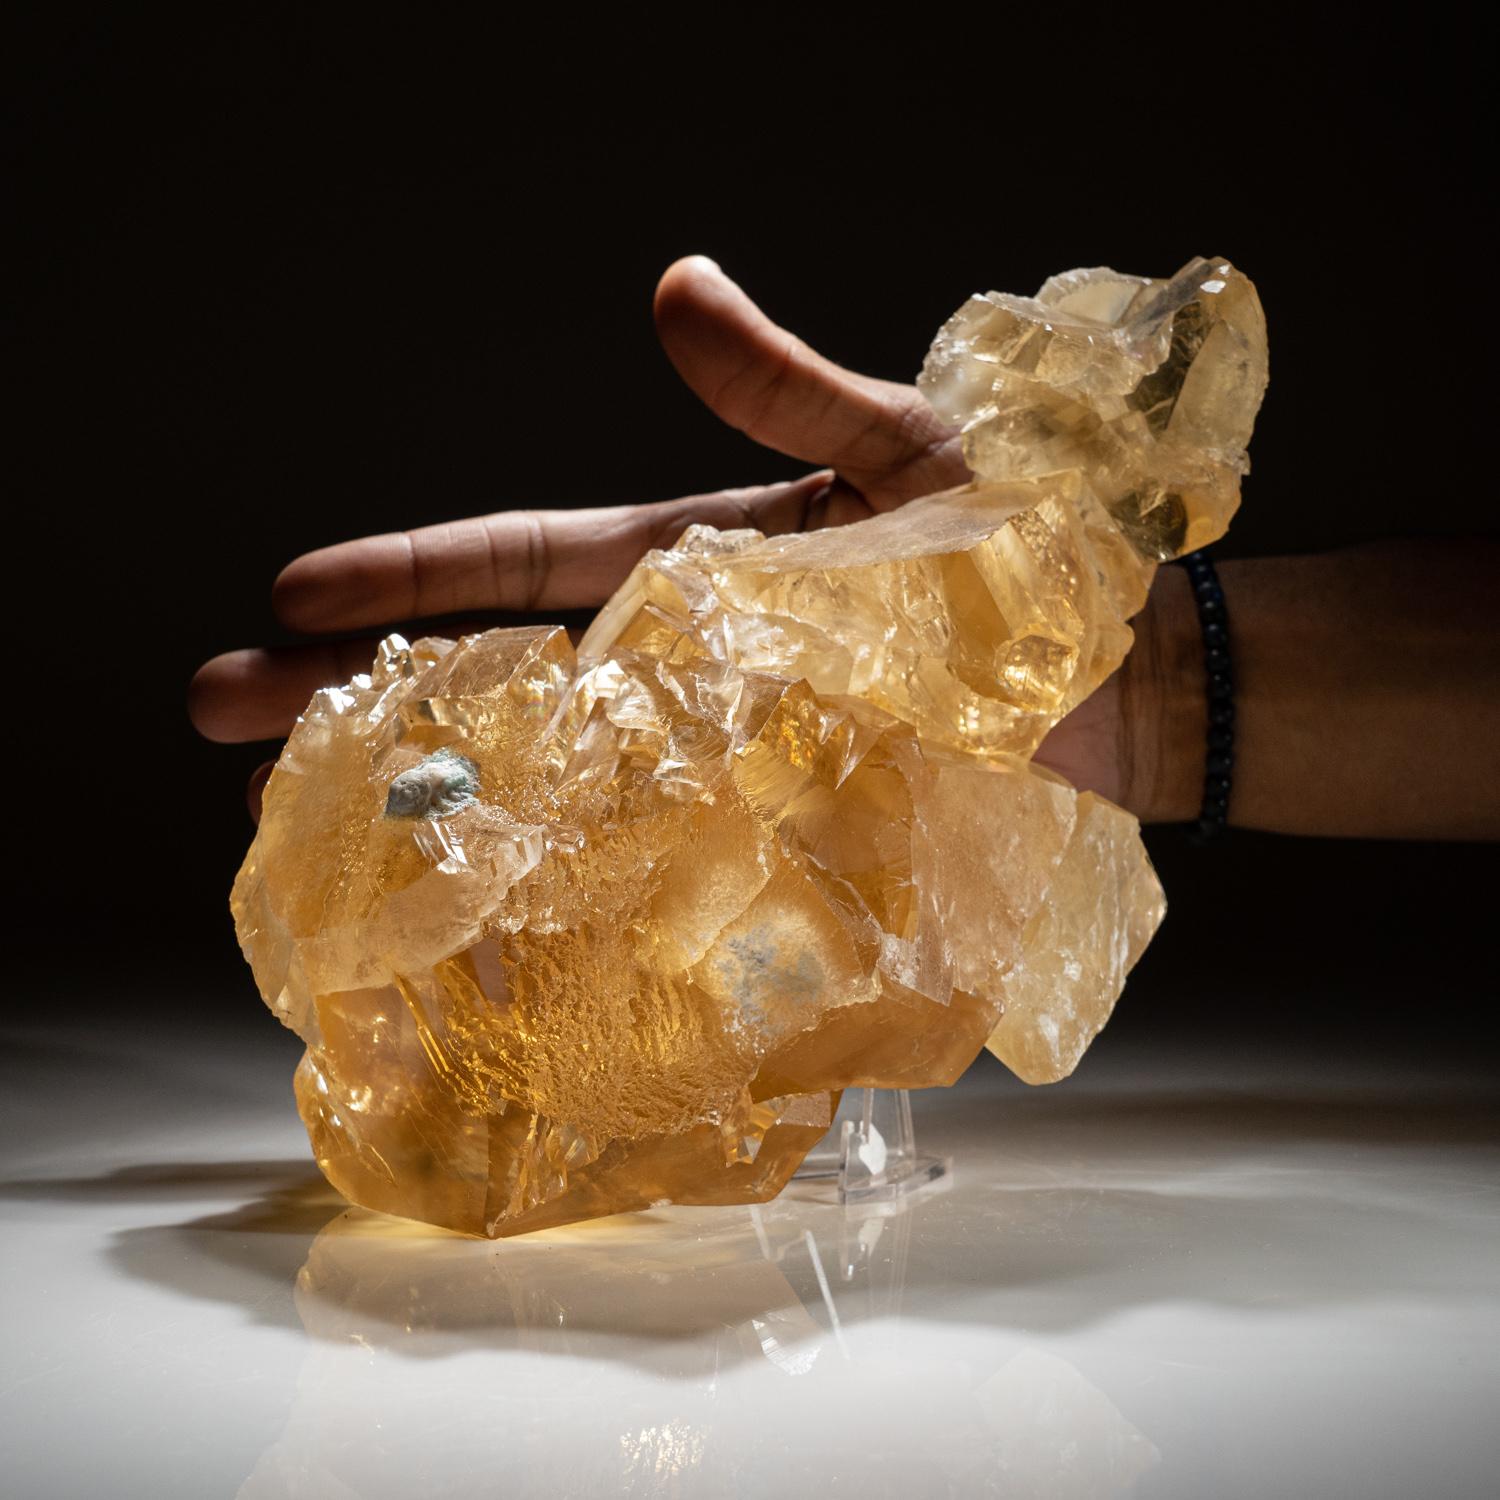 From Tieshan District, Huangshi Prefecture, Hubei Province, China

Lustrous translucent large blocky golden rhombohedral crystals of calcite in a stacking formation. The calcite crystals have a rich golden color with areas leading into a black